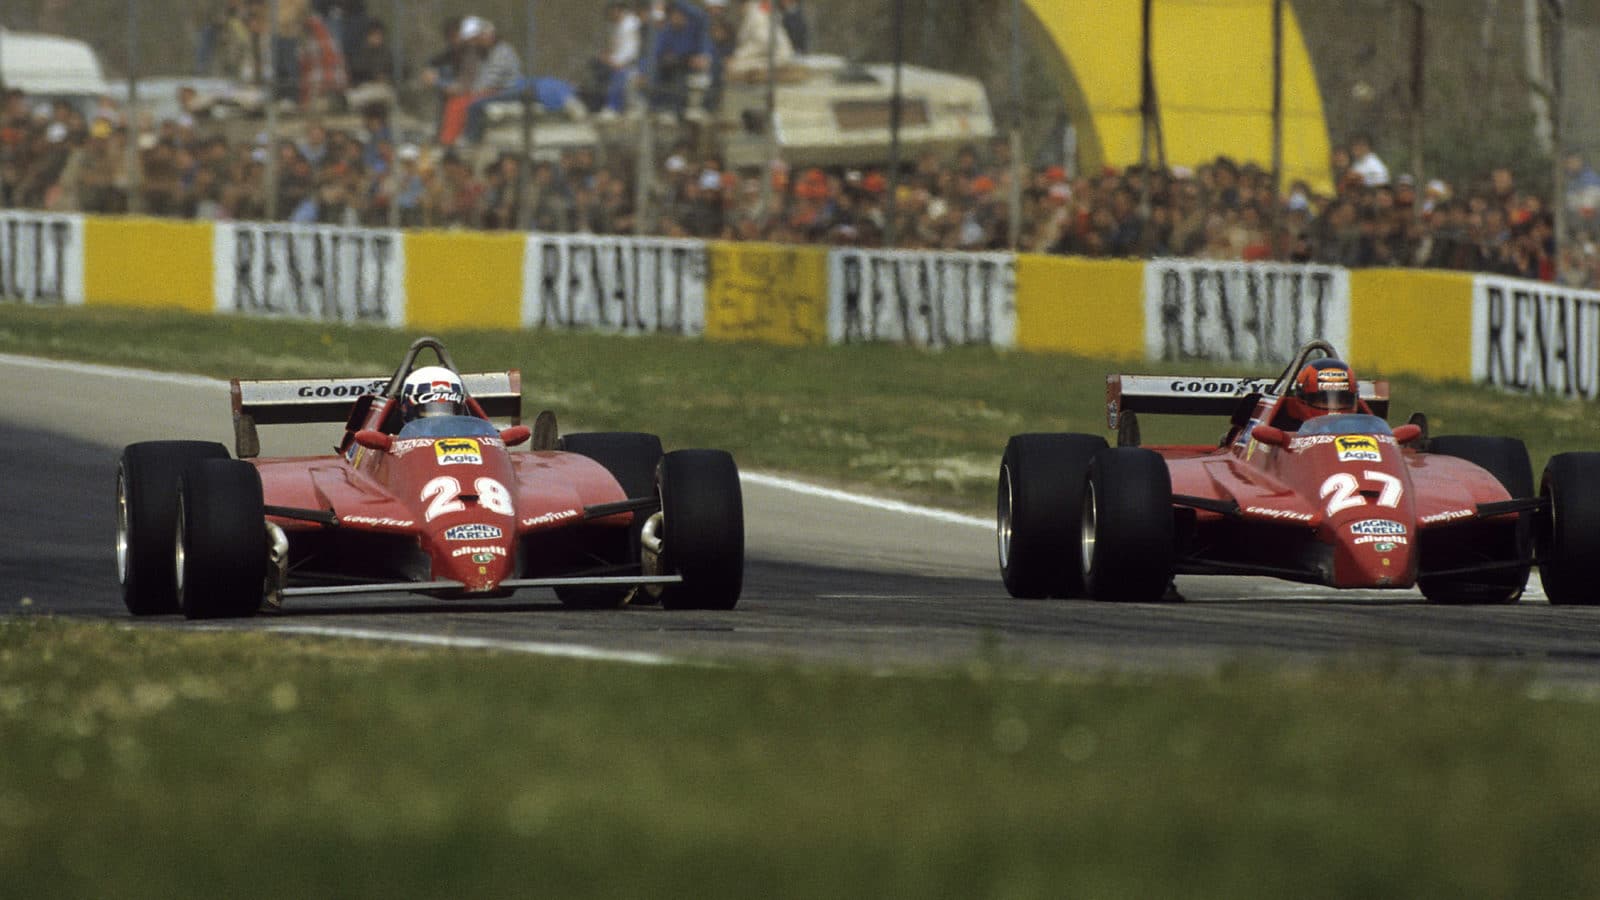 Didier Pironi and Gilles Villeneuve's Ferraris side by side at Imola in the 1982 San Marino Grand Prix